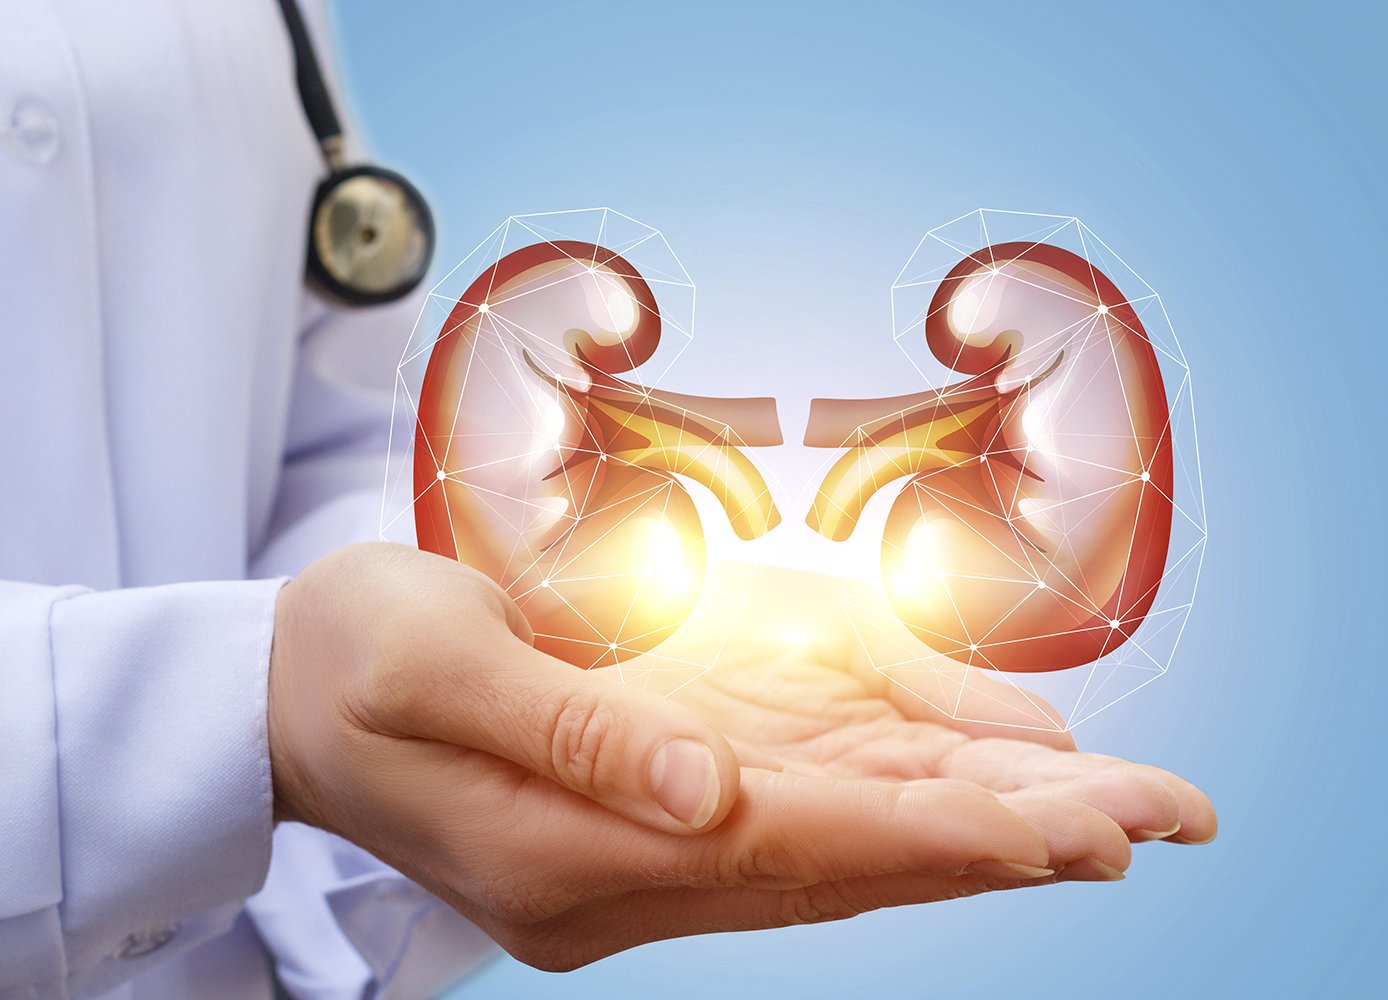 Take Better Care of Your Kidneys